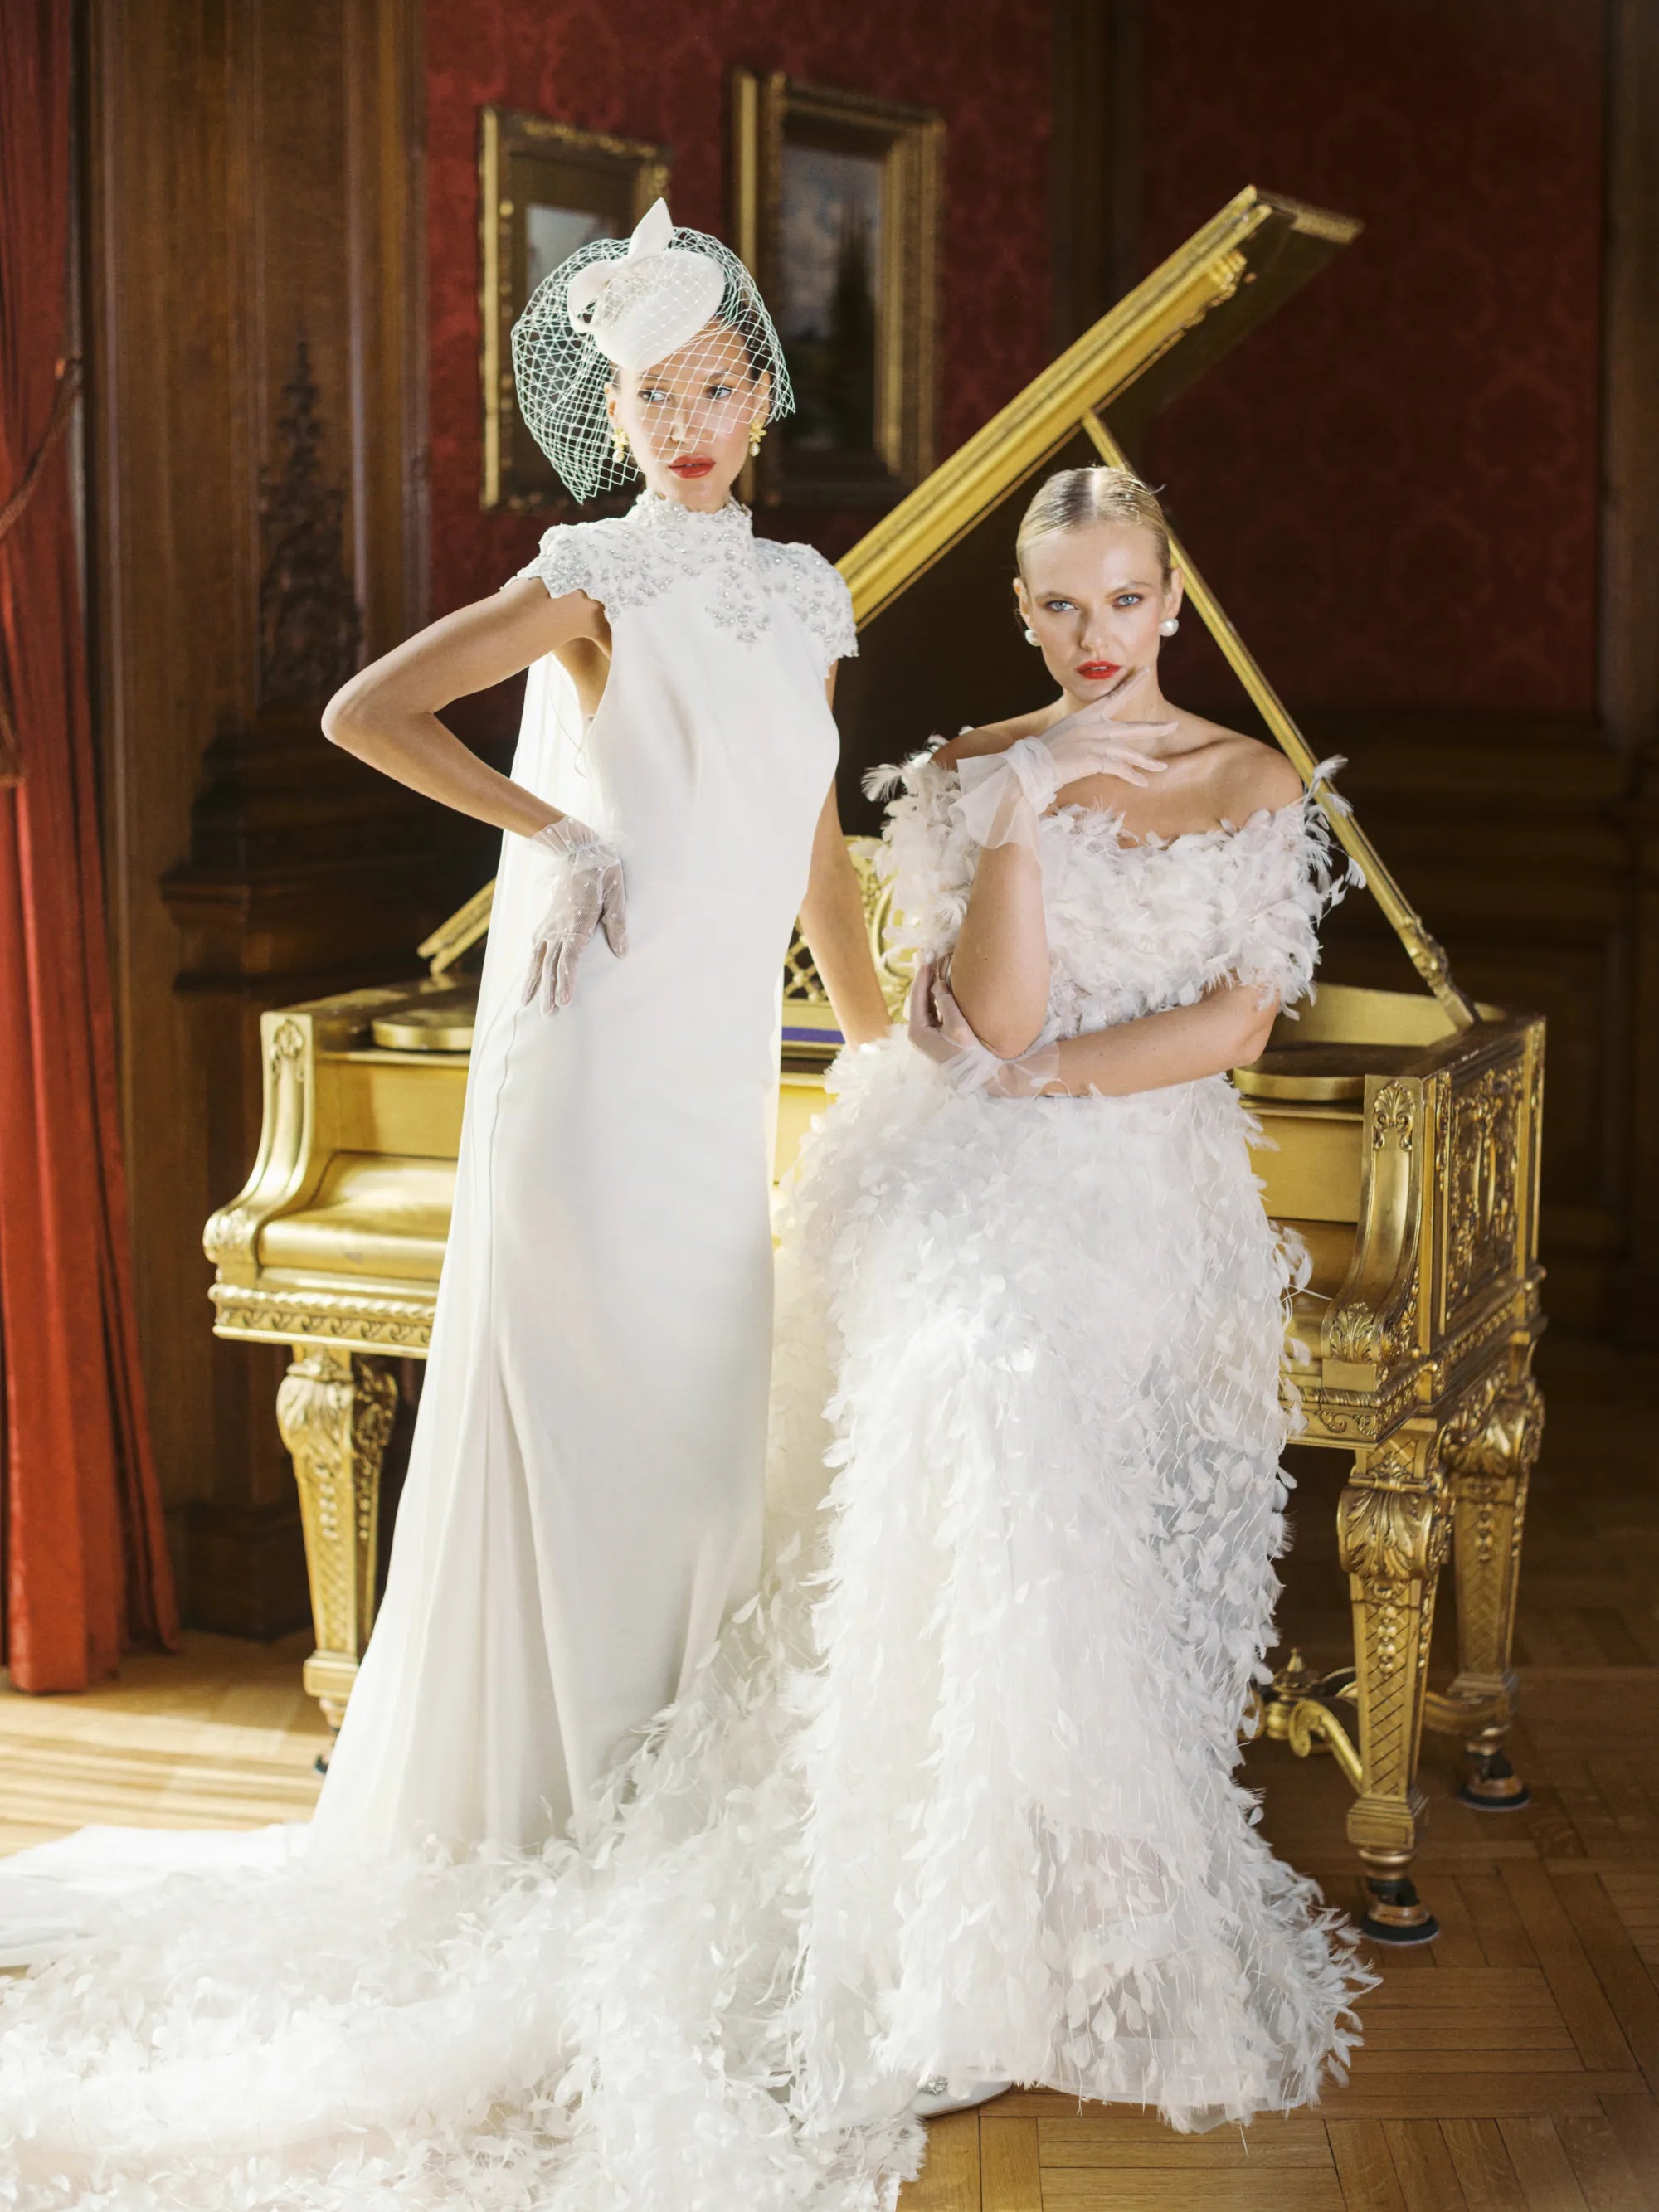 Two brides in white dress and white bridal gloves sitting near gold piano.